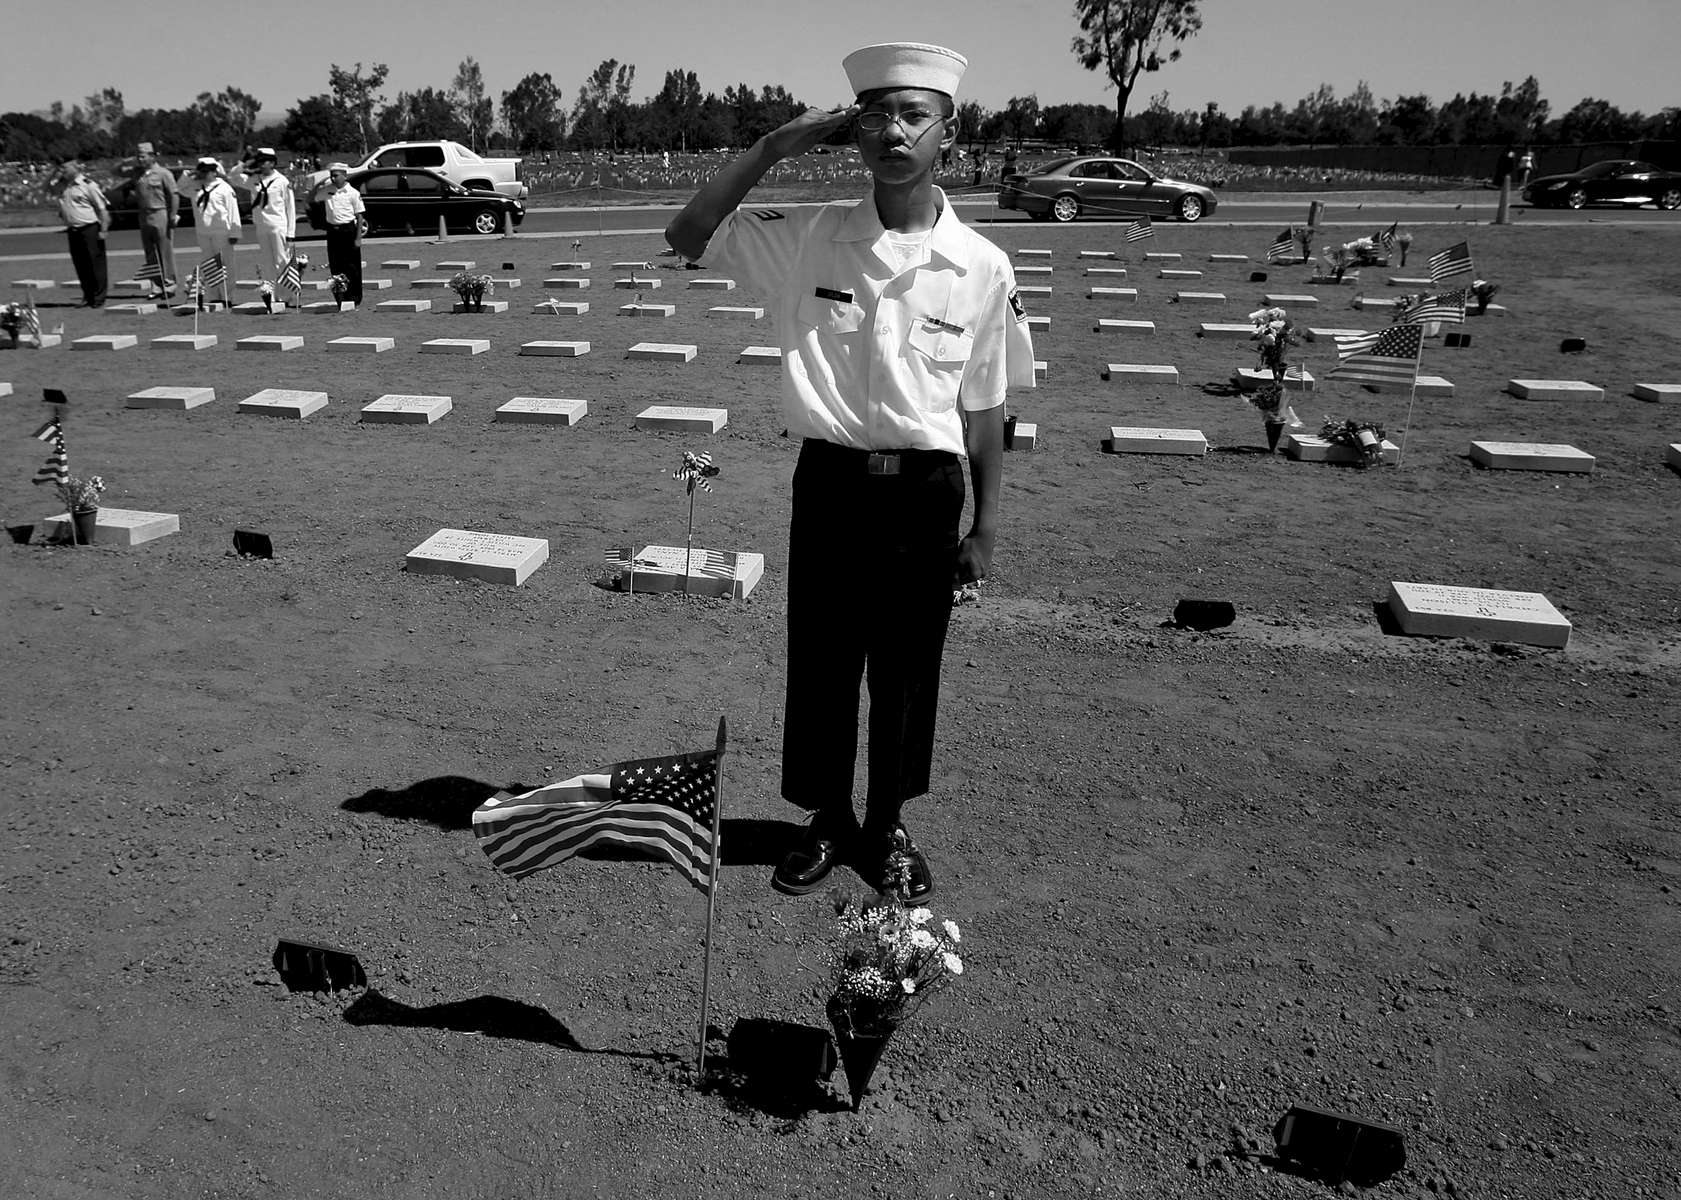 Christian Vilda of the United States Navel Sea Cadets Corps salutes after placing the American flag and flowers by a gravesite at Riverside National Cemetery. (The Press-Enterprise/ Mark Zaleski)